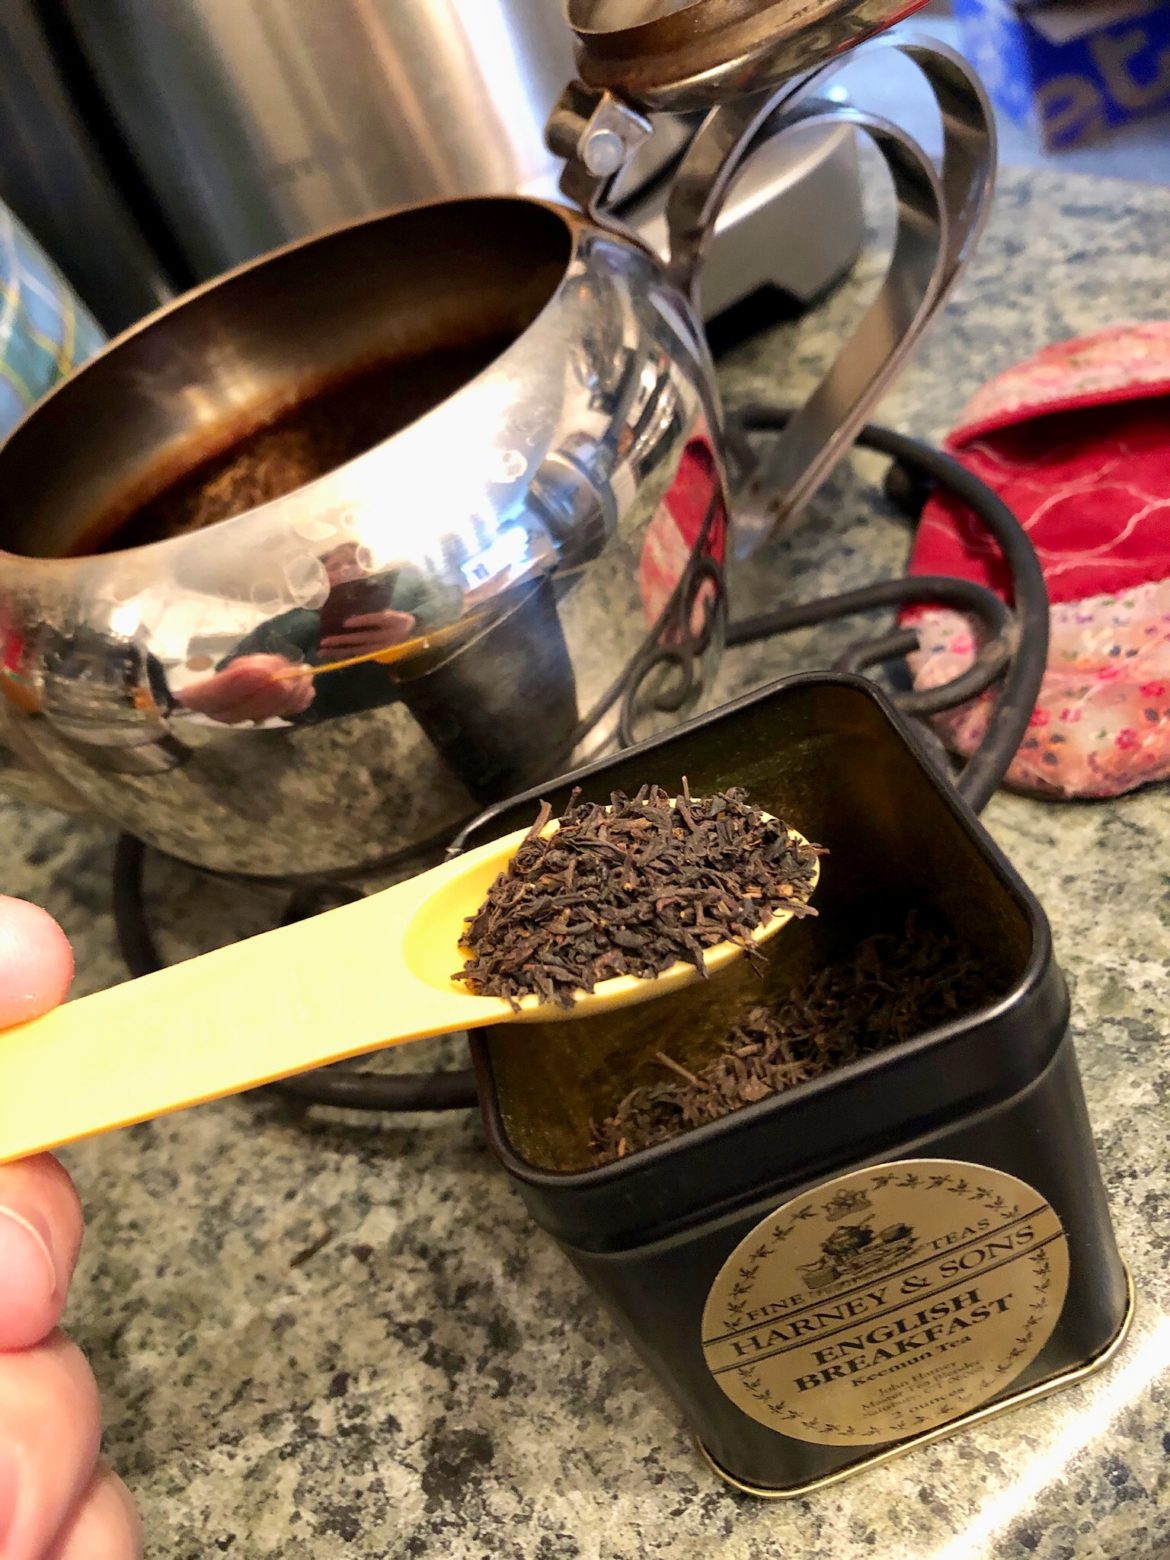 How to Brew The Perfect Authentic “Proper Cuppa” Sugar, Spice and Yarn